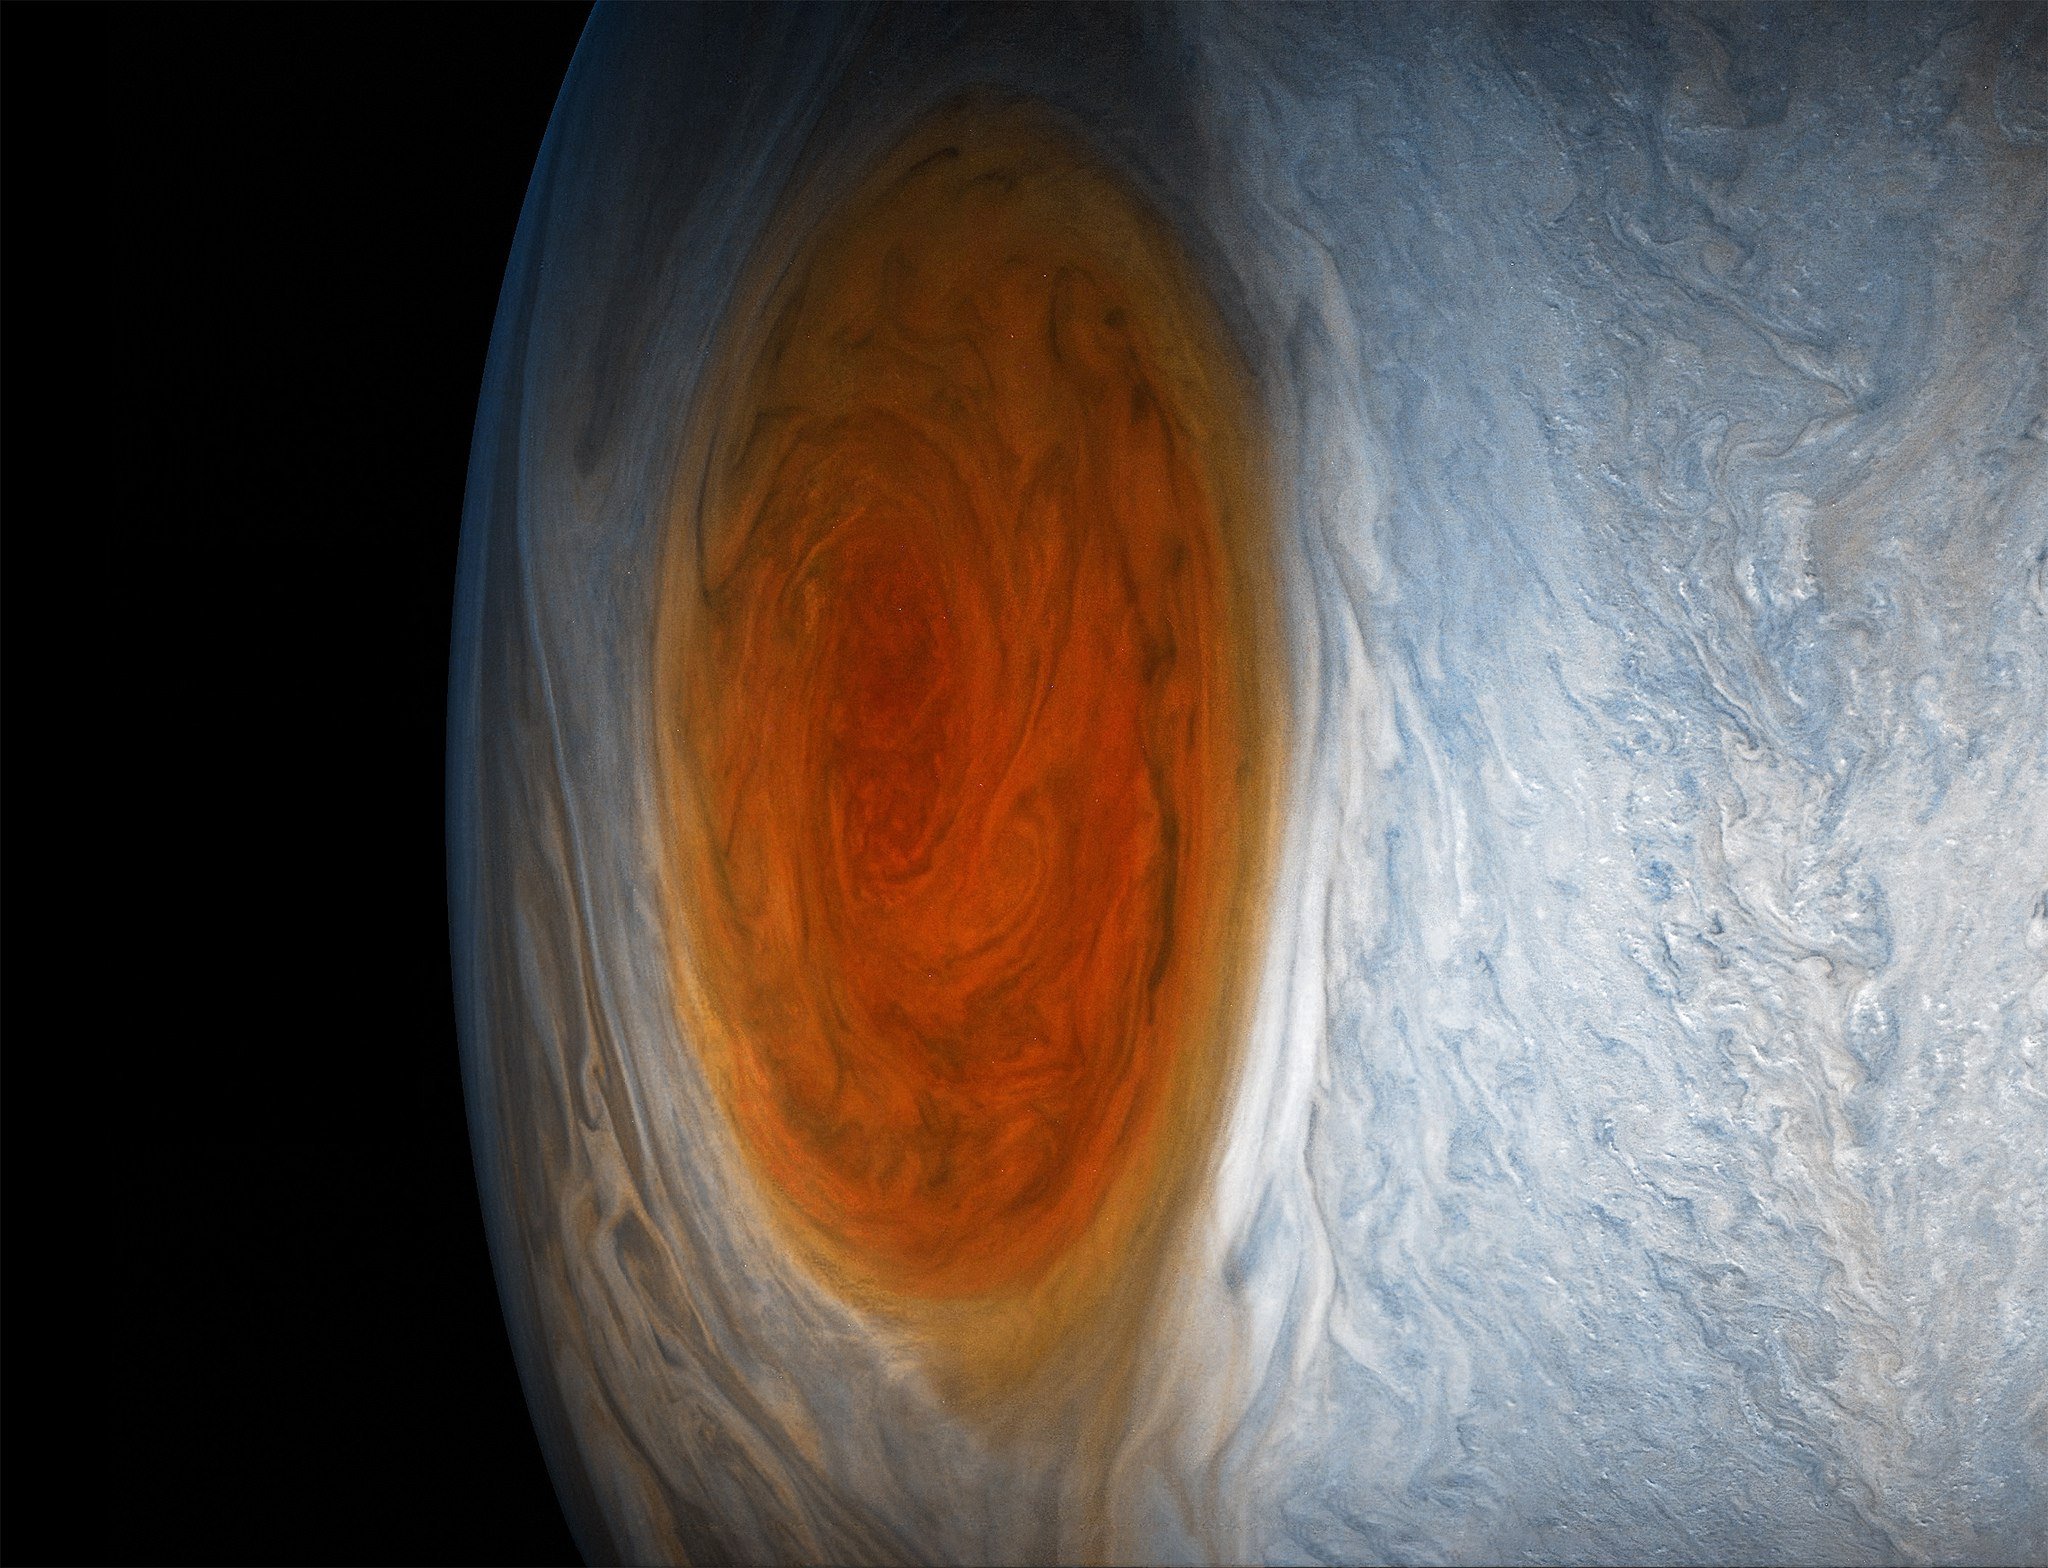 You’ve Never Seen Photos of Jupiter Like This